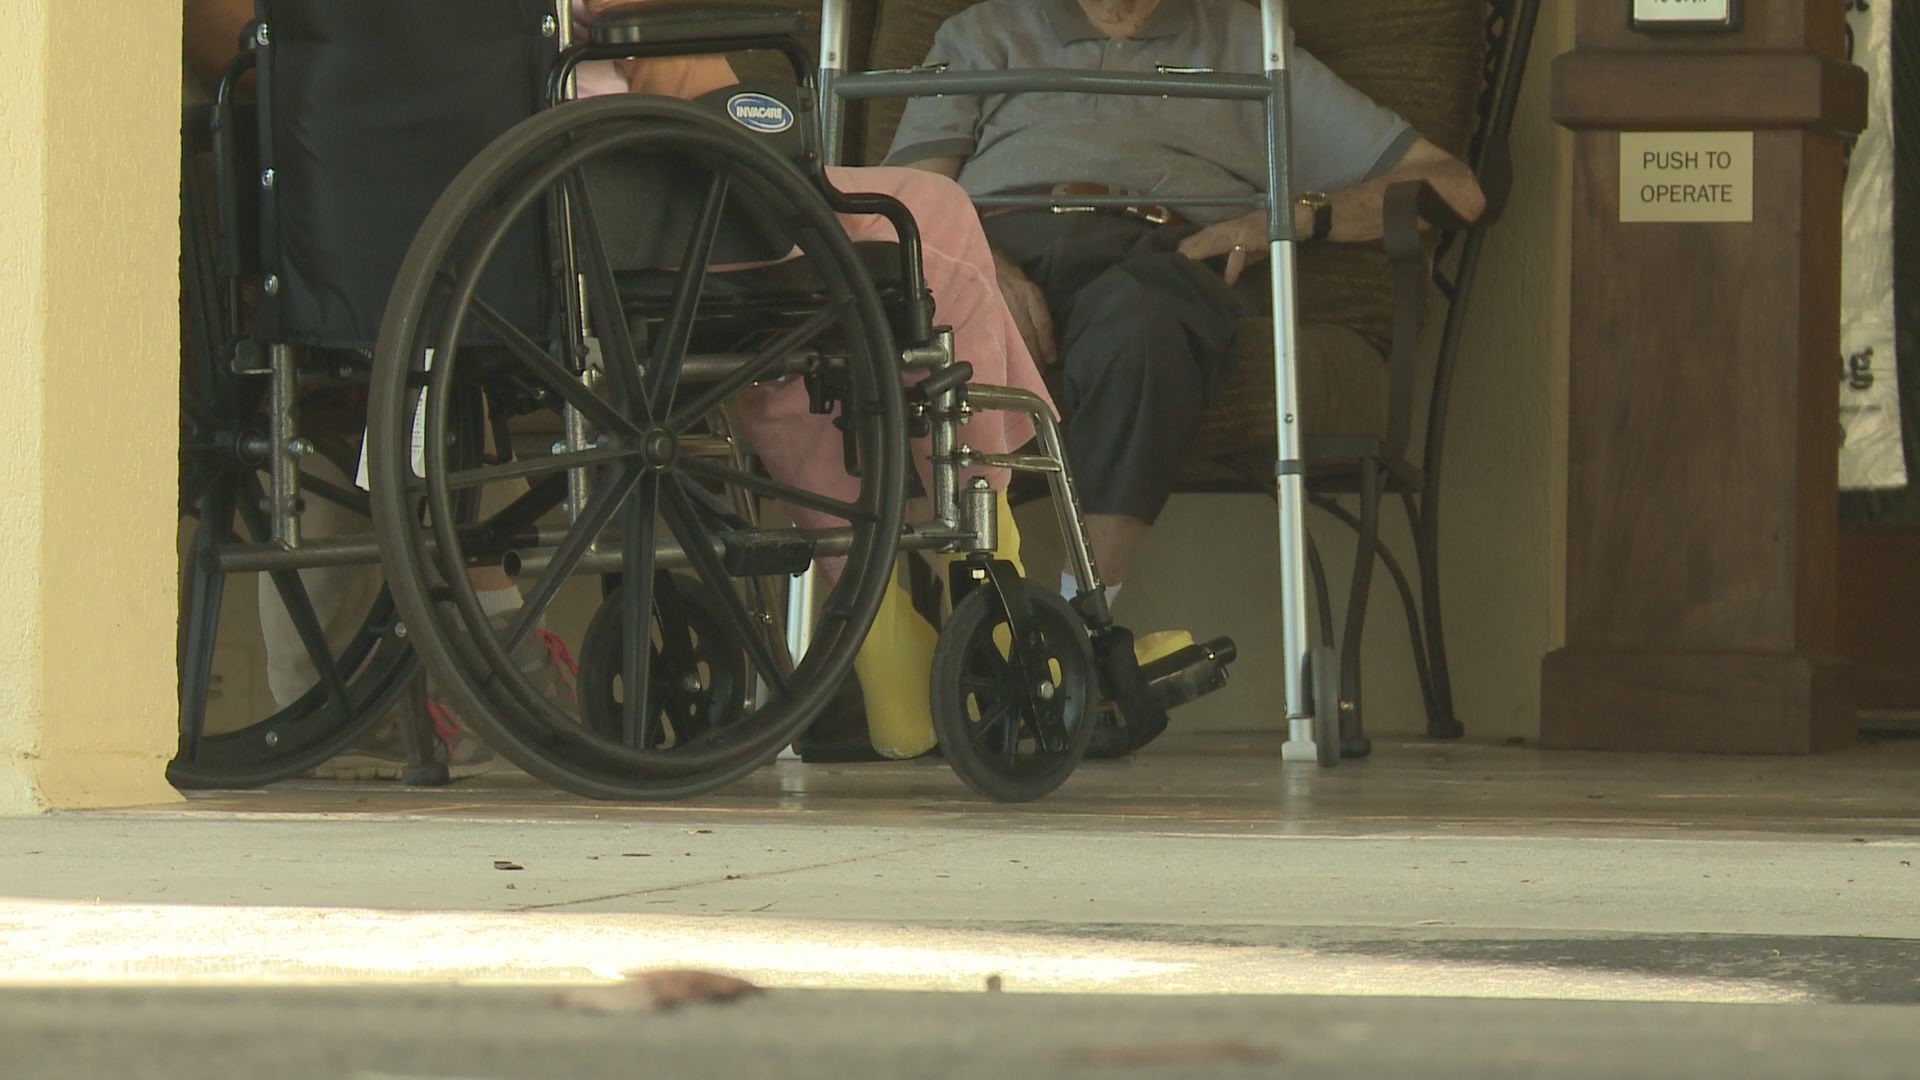 10Investigates has reached out to eight facilities listed by the state that have positive COVID-19 cases.